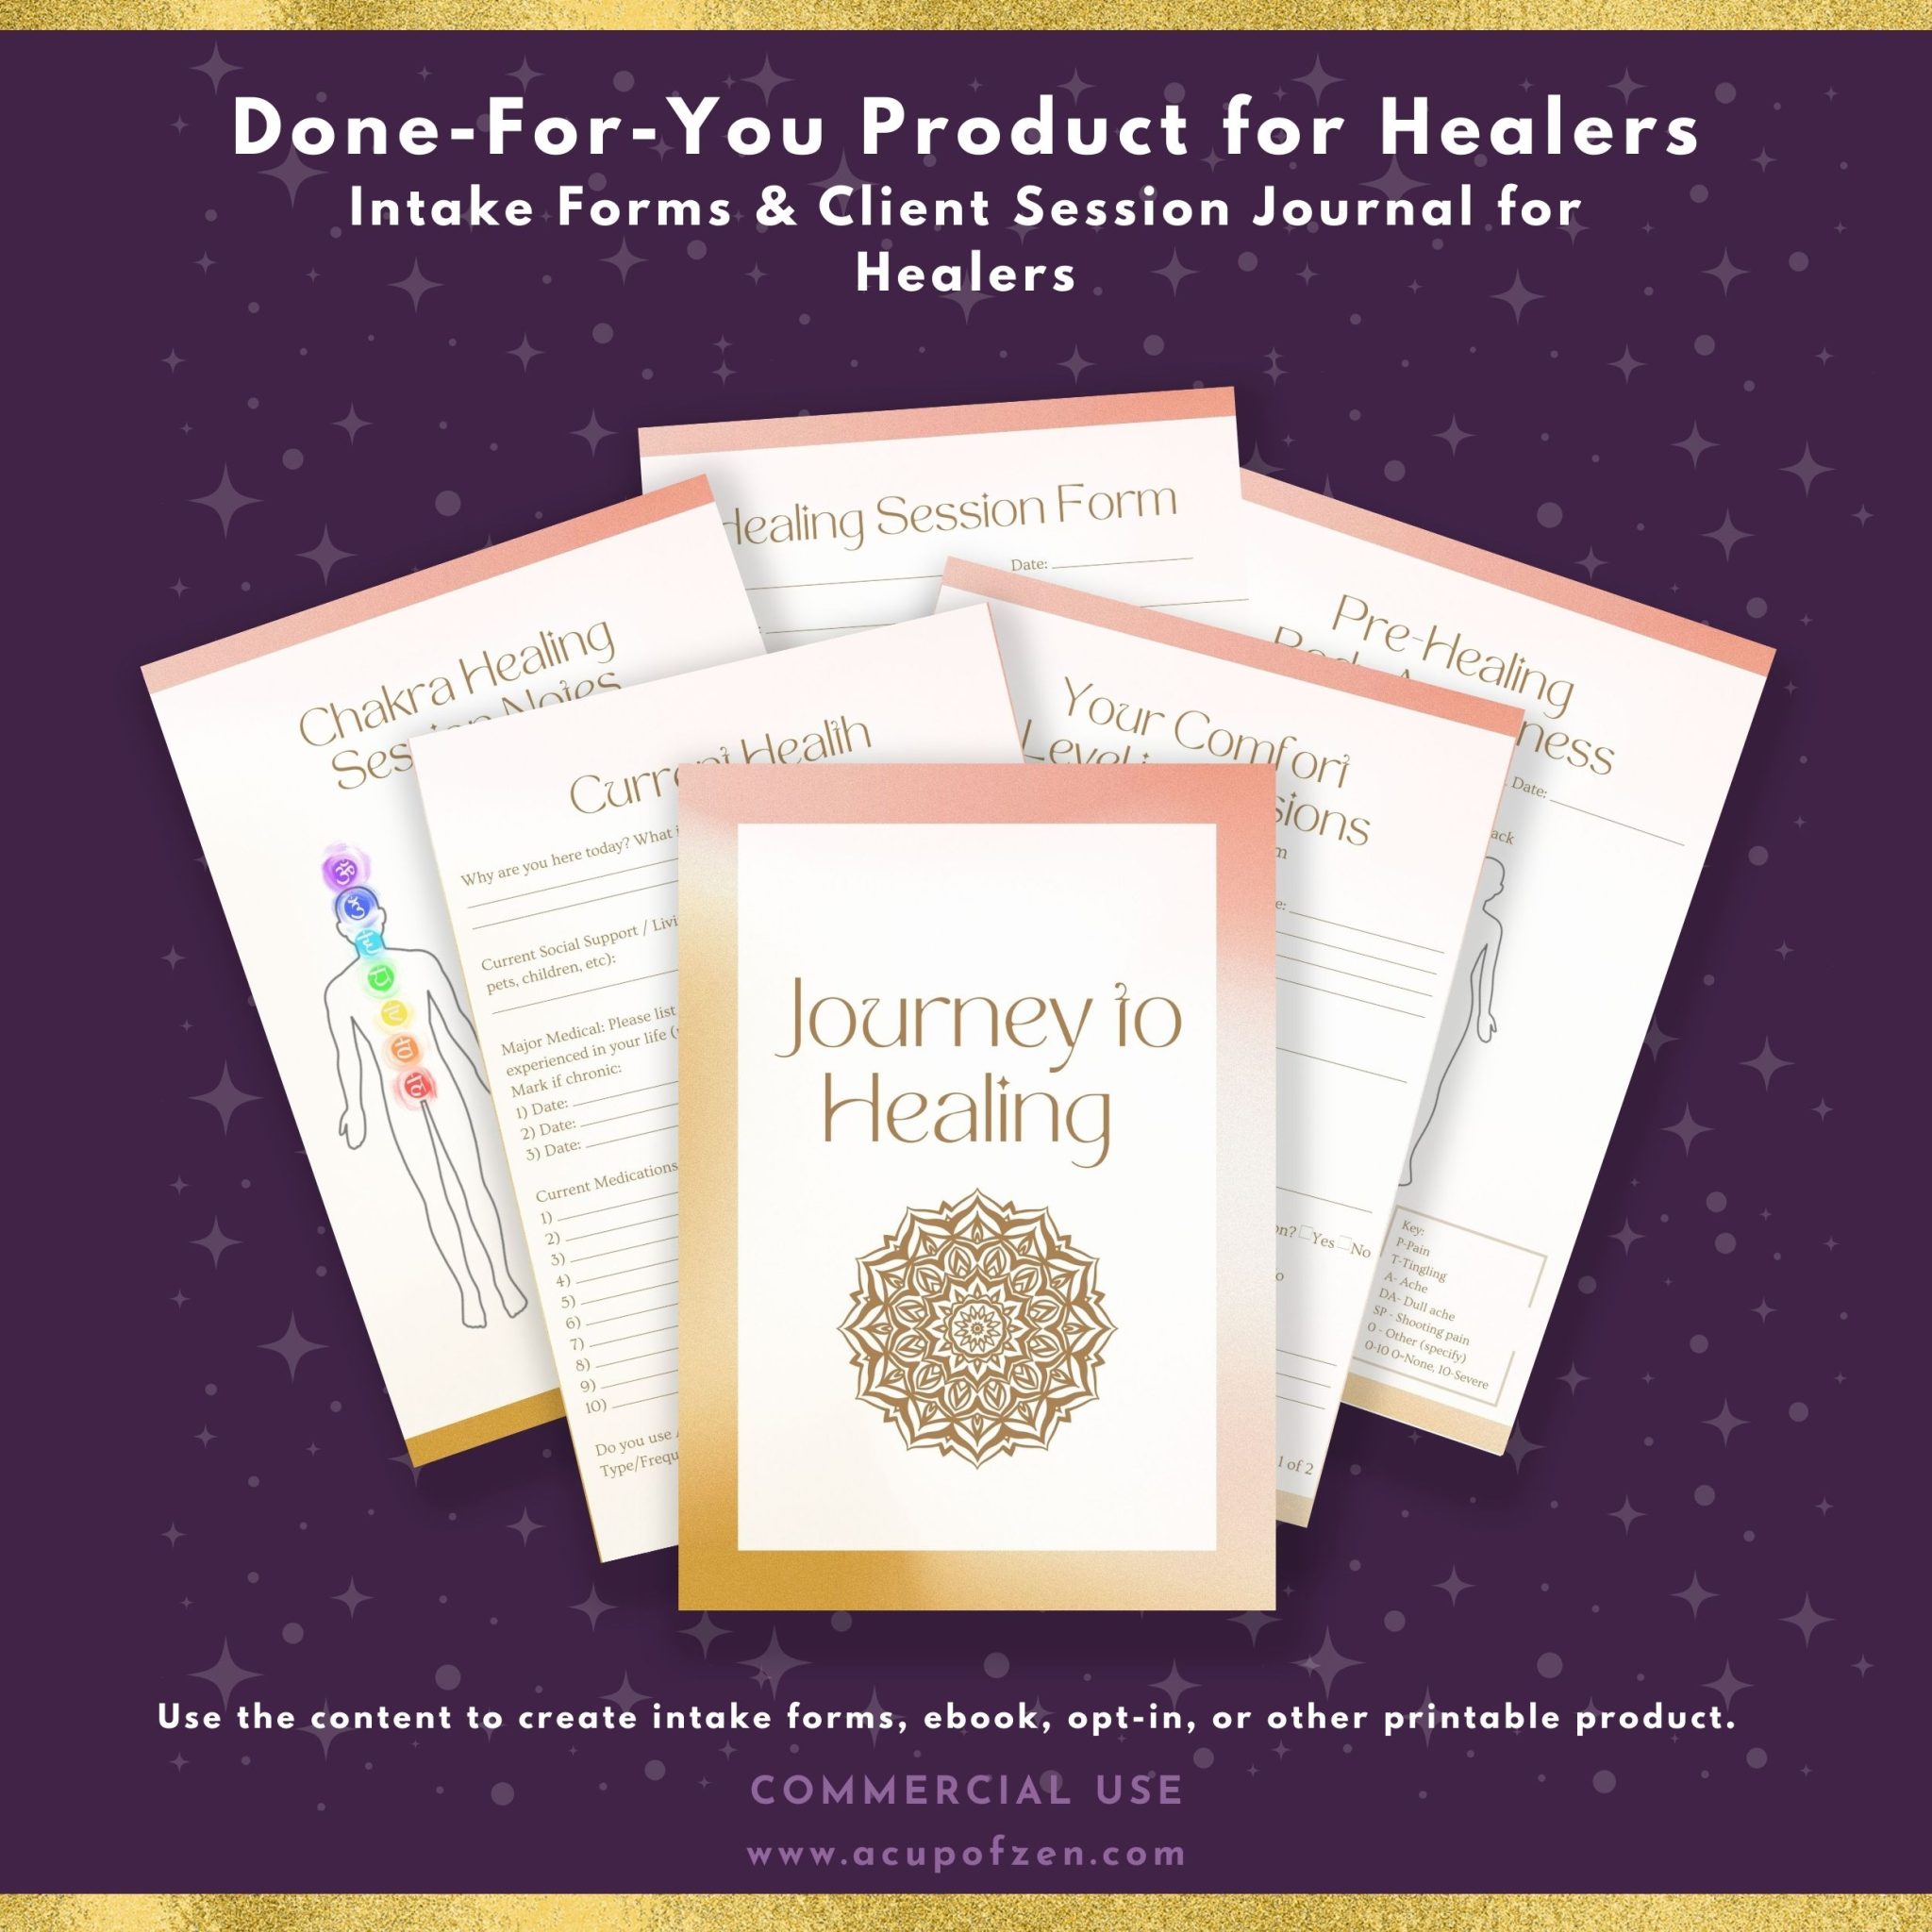 Intake Forms & Client Journal for Healers